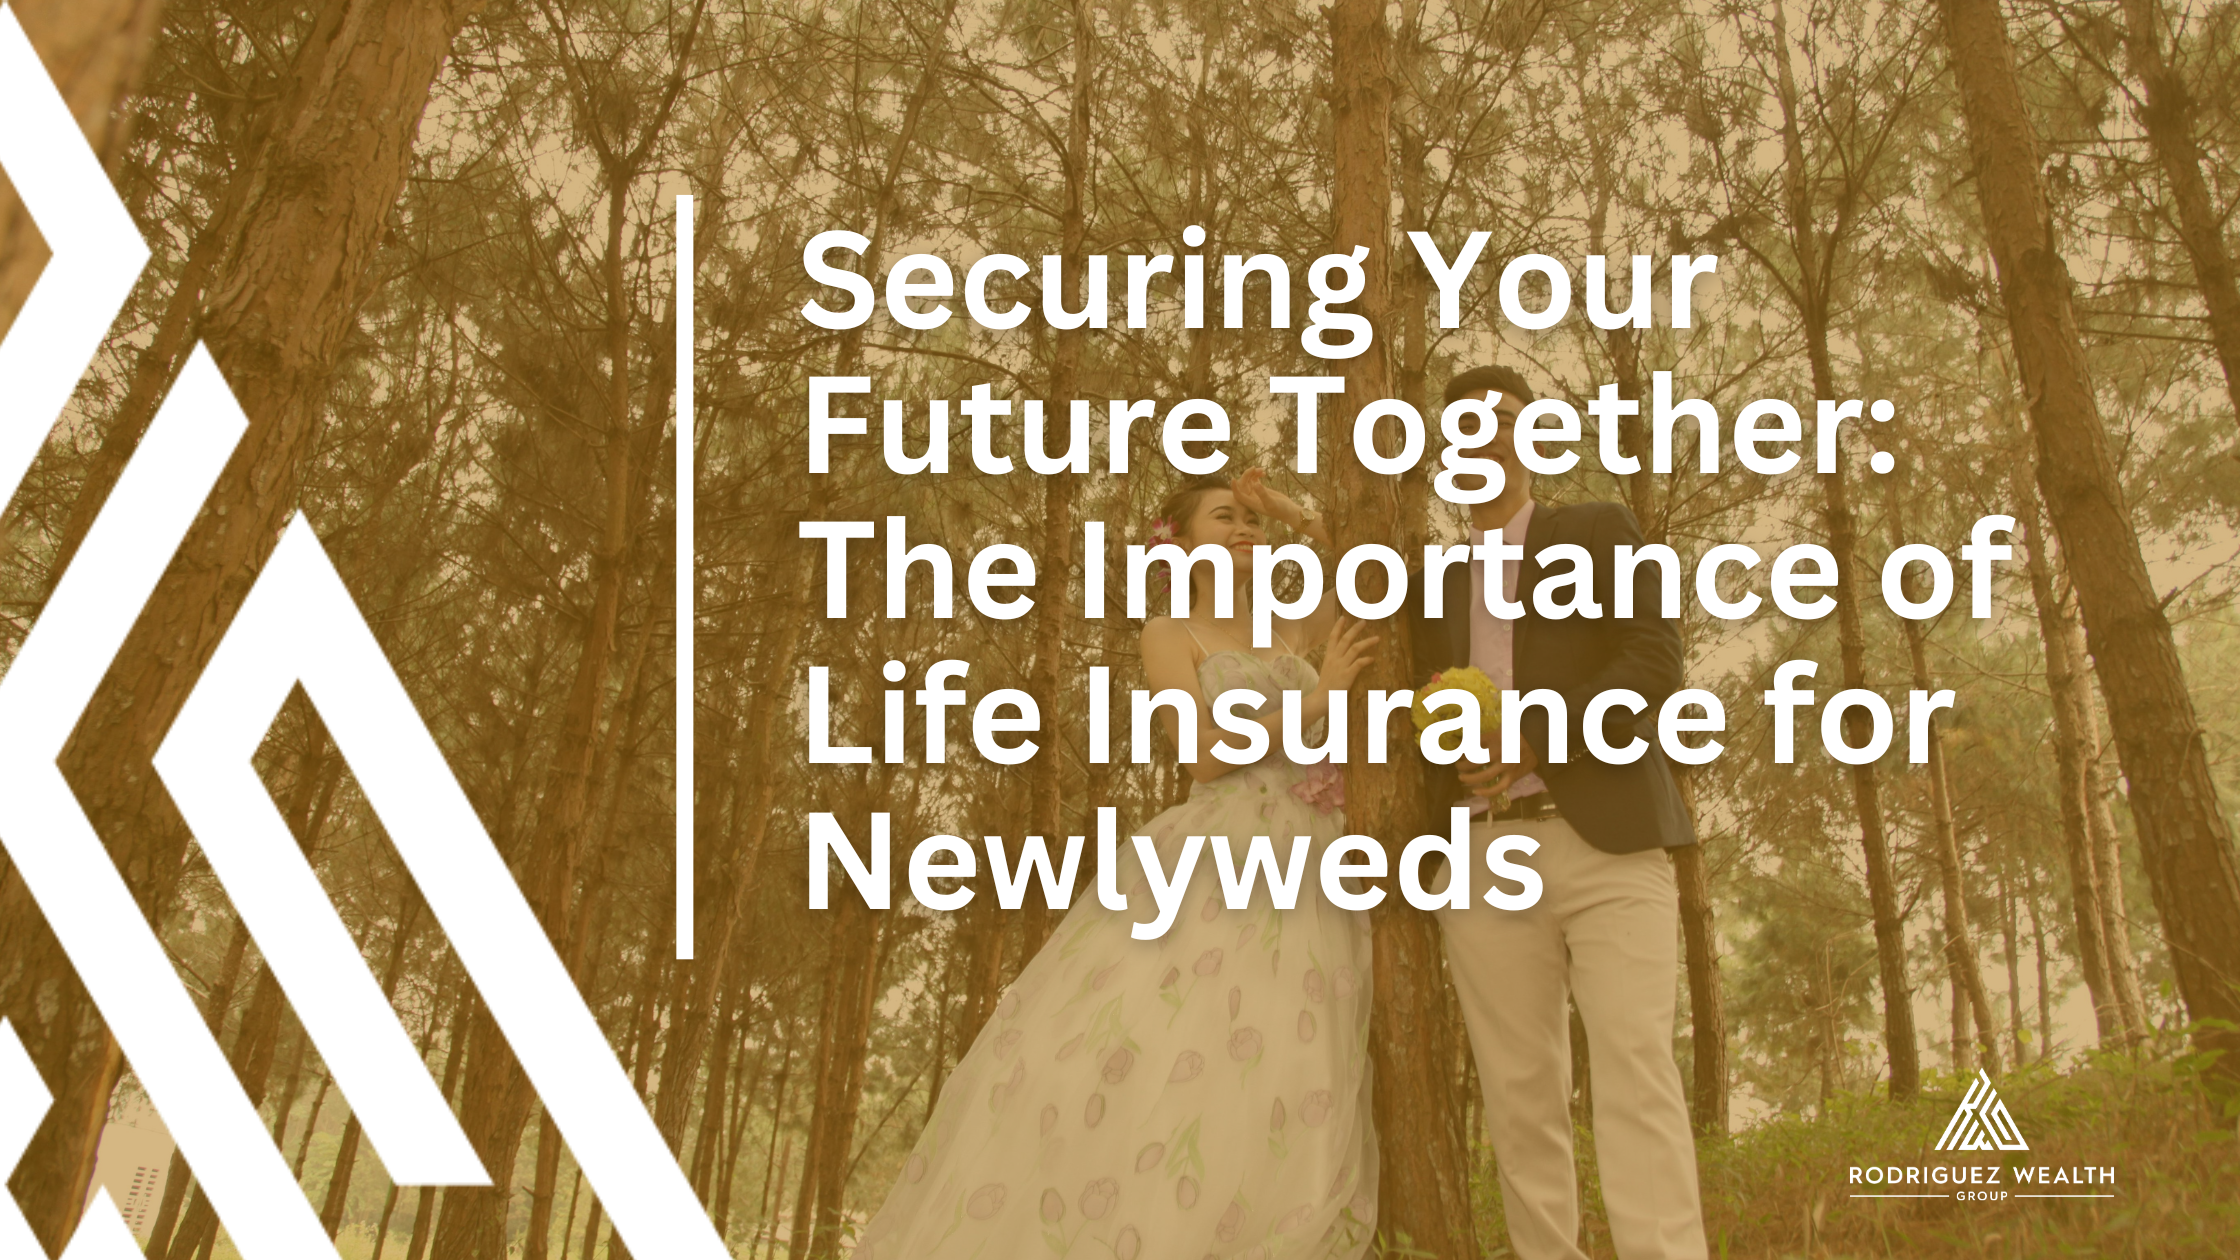 Securing Your Future Together: The Importance of Life Insurance for Newlyweds